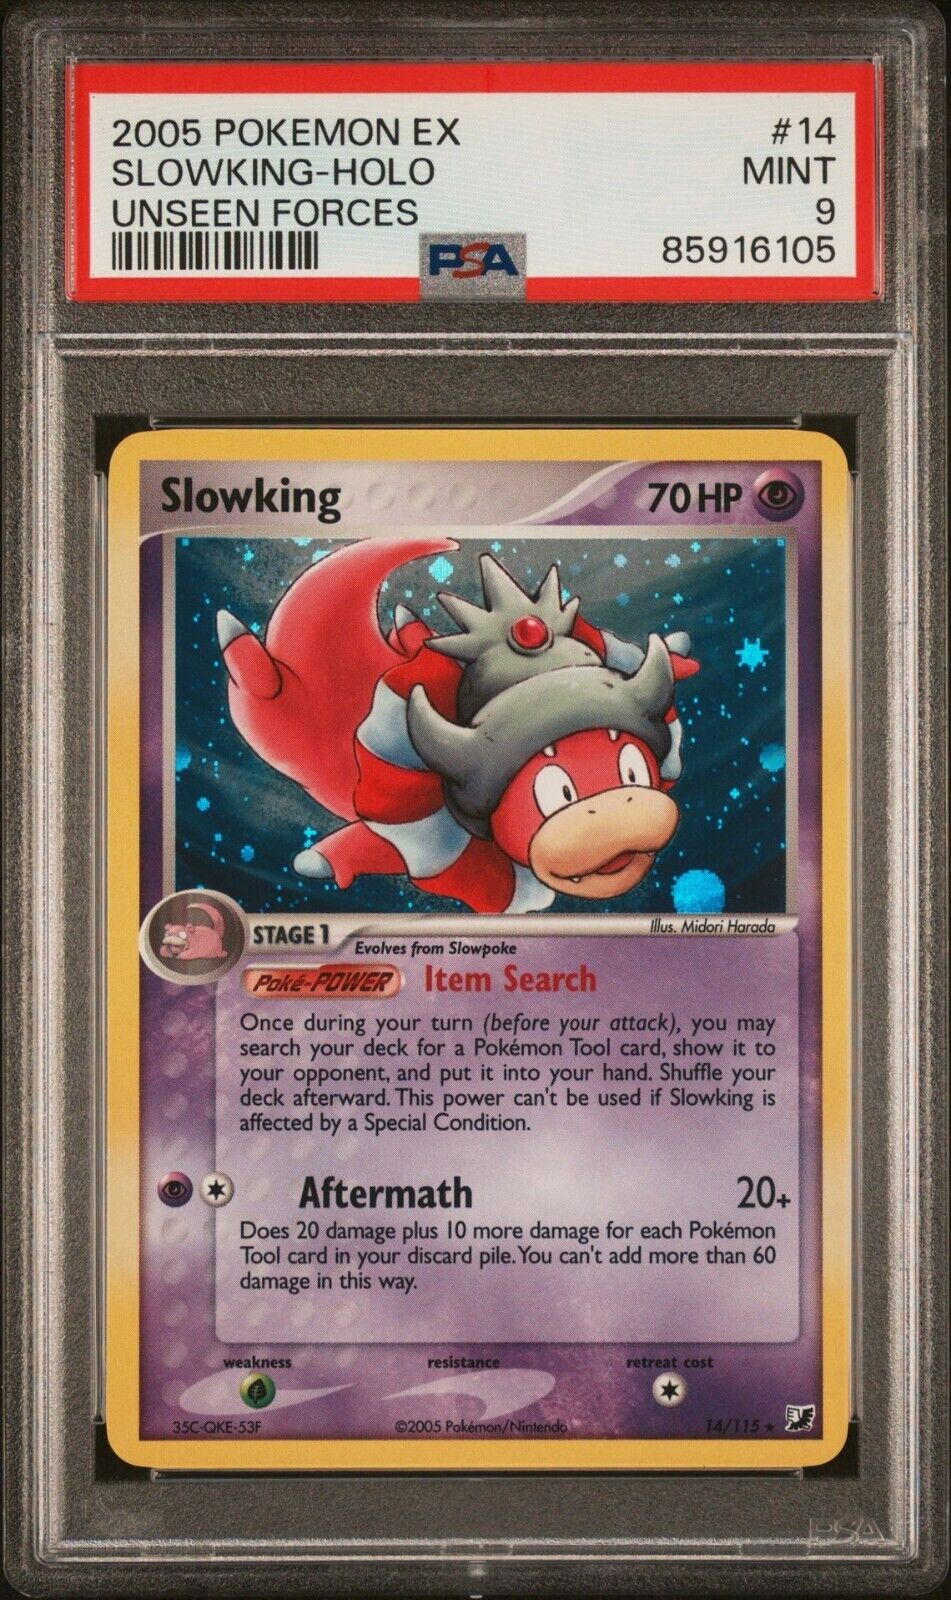 PSA 9 MINT Slowking Holo 14/115 Pokemon 2005 Unseen Forces EX Card 2001